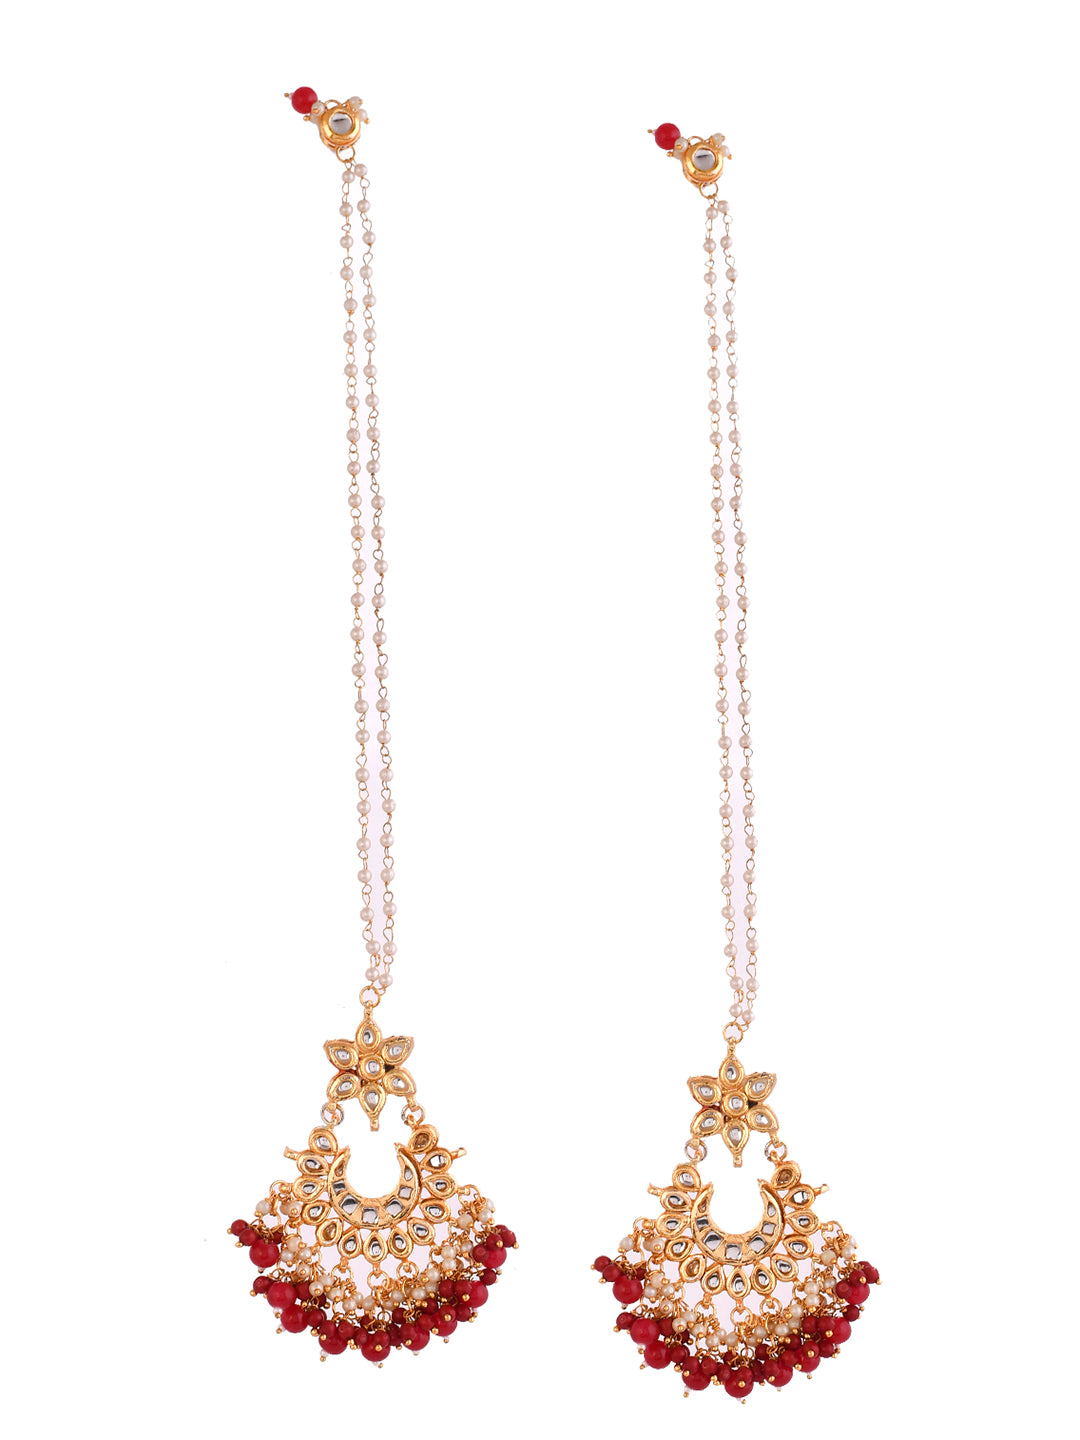 Elegant Gold-plated and Red Gemstone Long Drop Earrings for a Royal Look